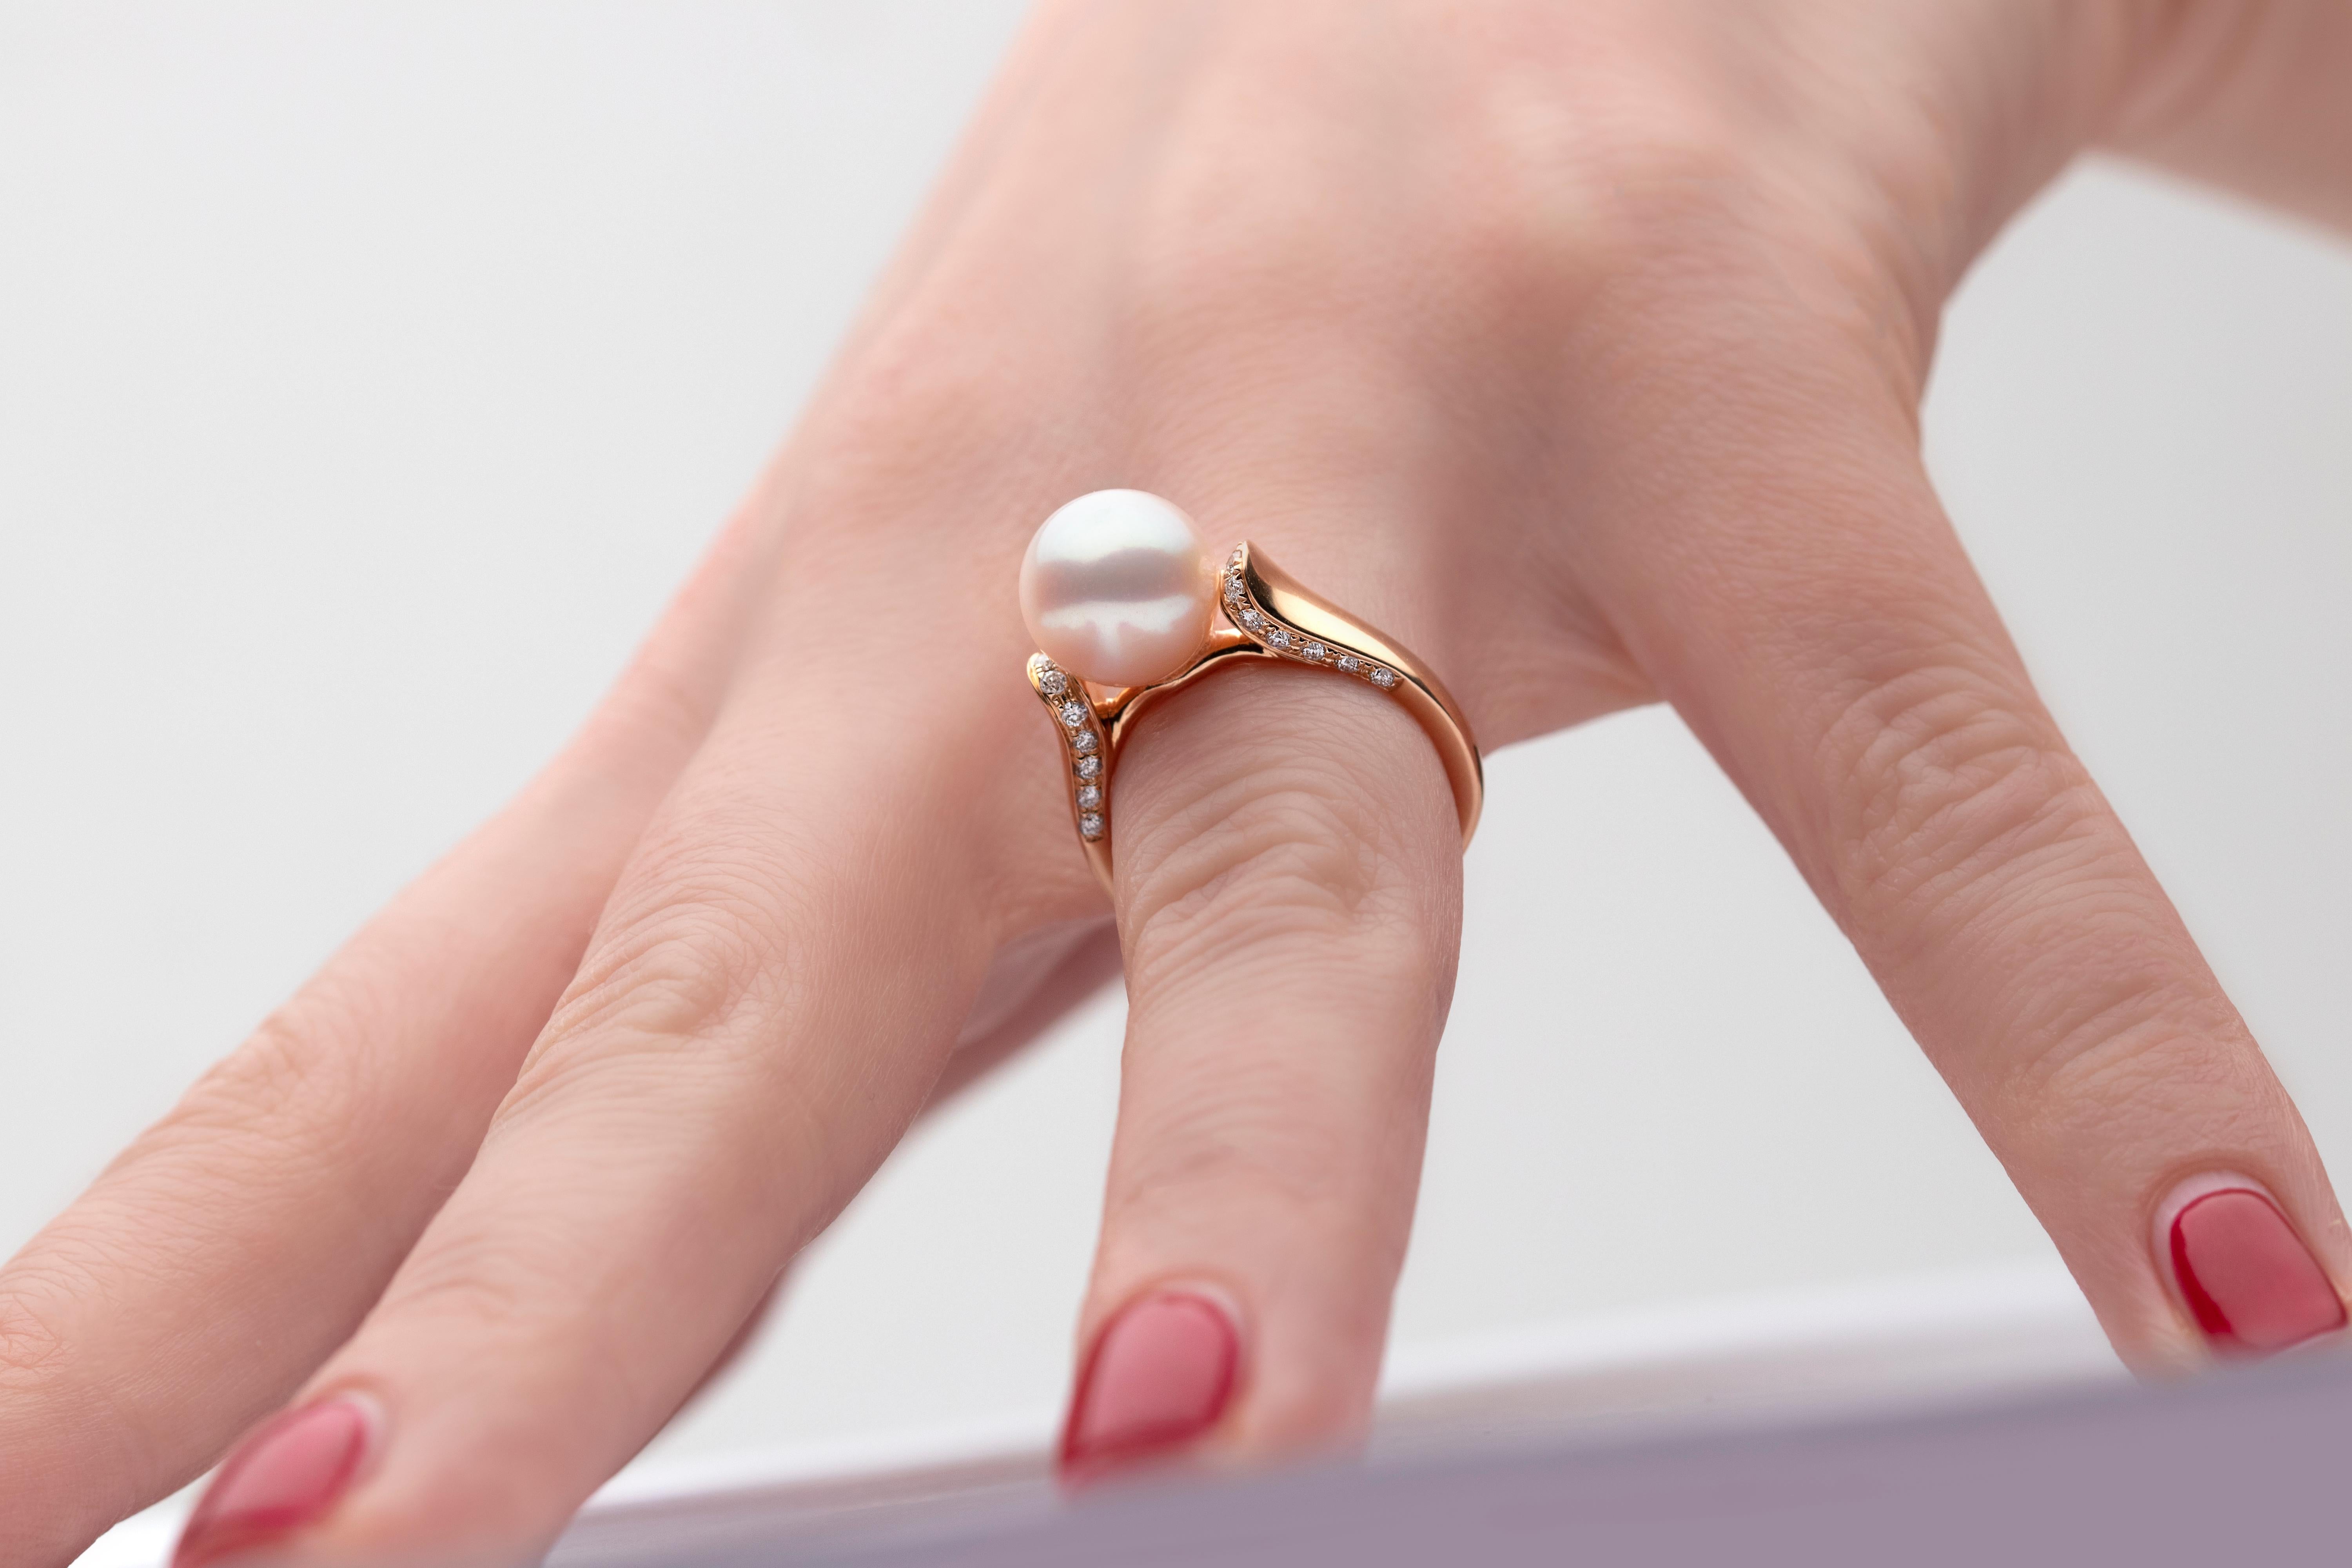 This elegant ring by Yoko London features a lustrous Freshwater pearl appearing to float amongst diamonds. The 18 Karat Rose gold setting serves to accentuate the exceptional lustre of the pearl and scintillation of the diamonds. The perfect